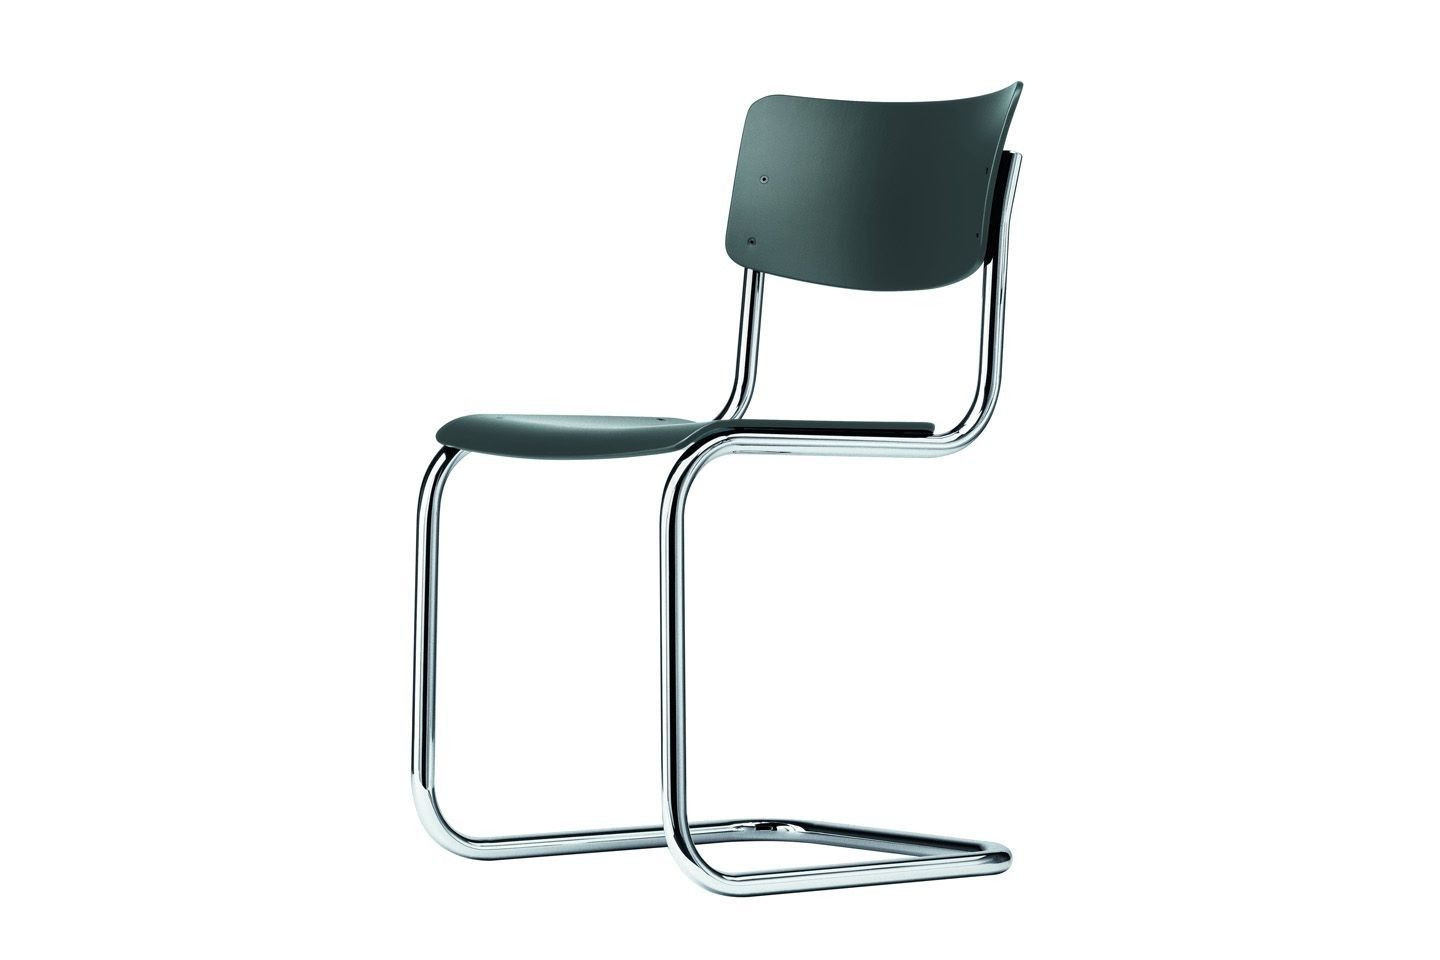 Rent a Dining chair Thonet s43 black? Rent at KeyPro furniture rental!